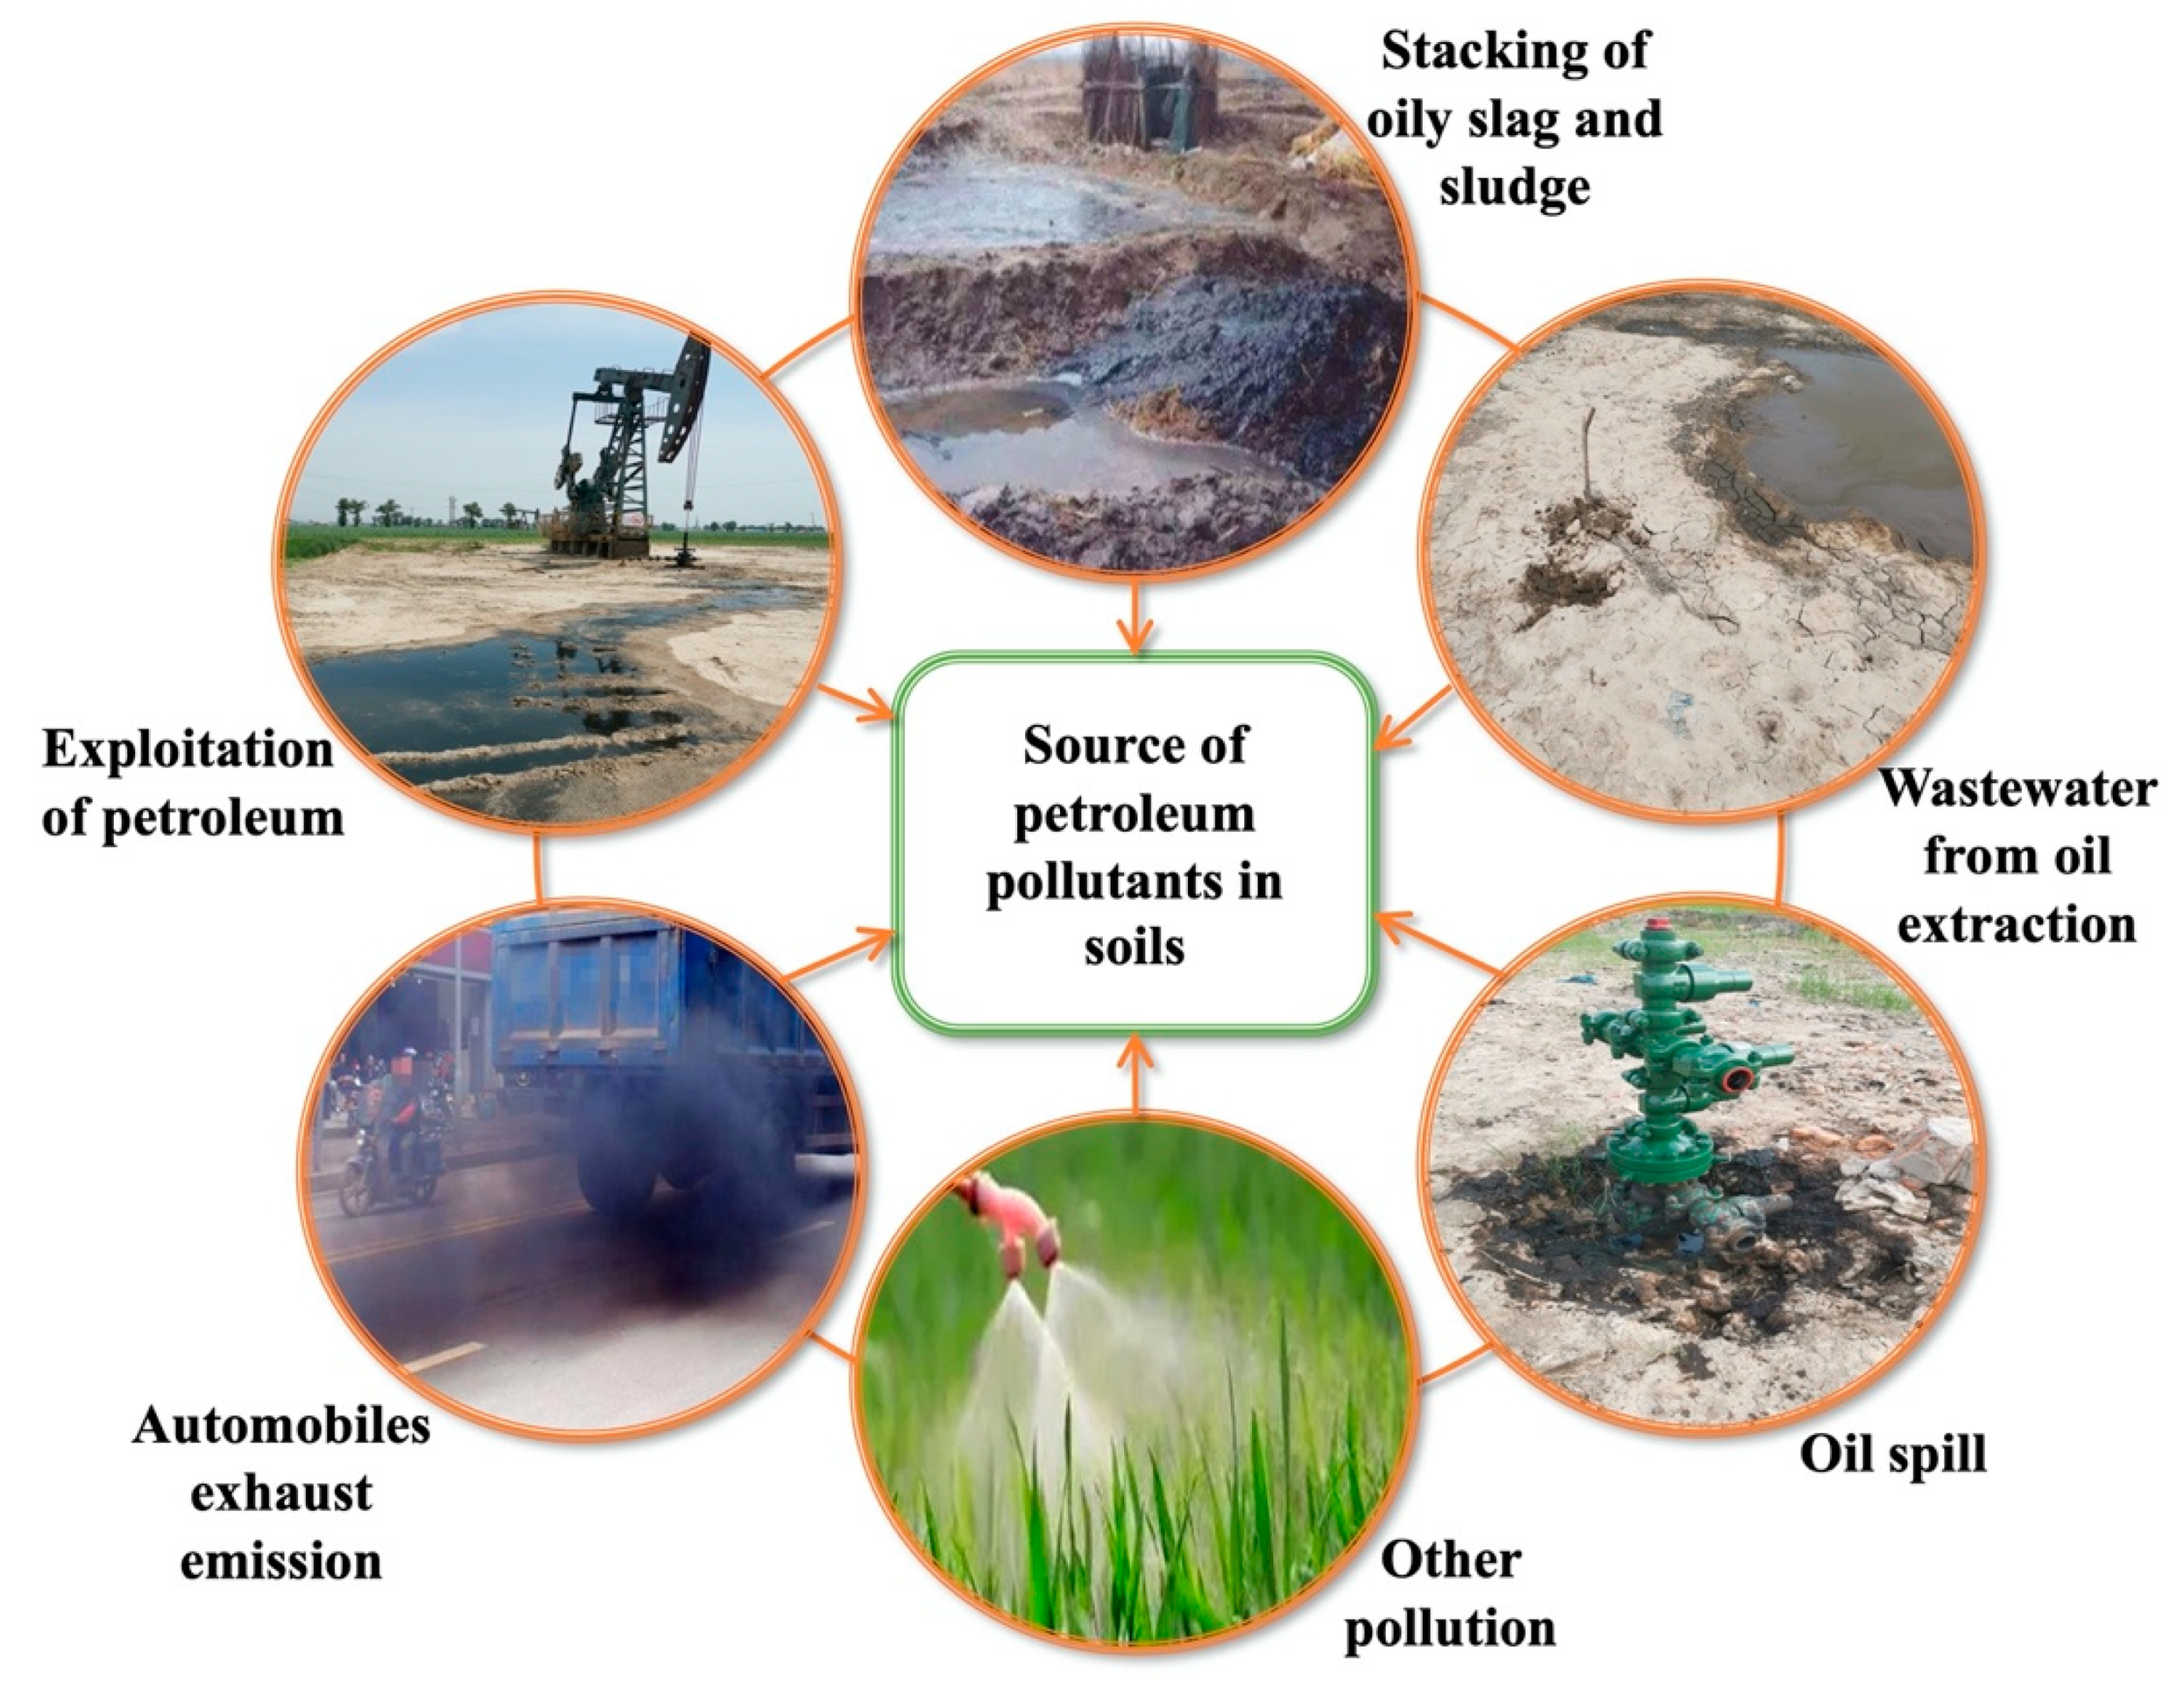 I. Introduction to Soil Pollution Remediation